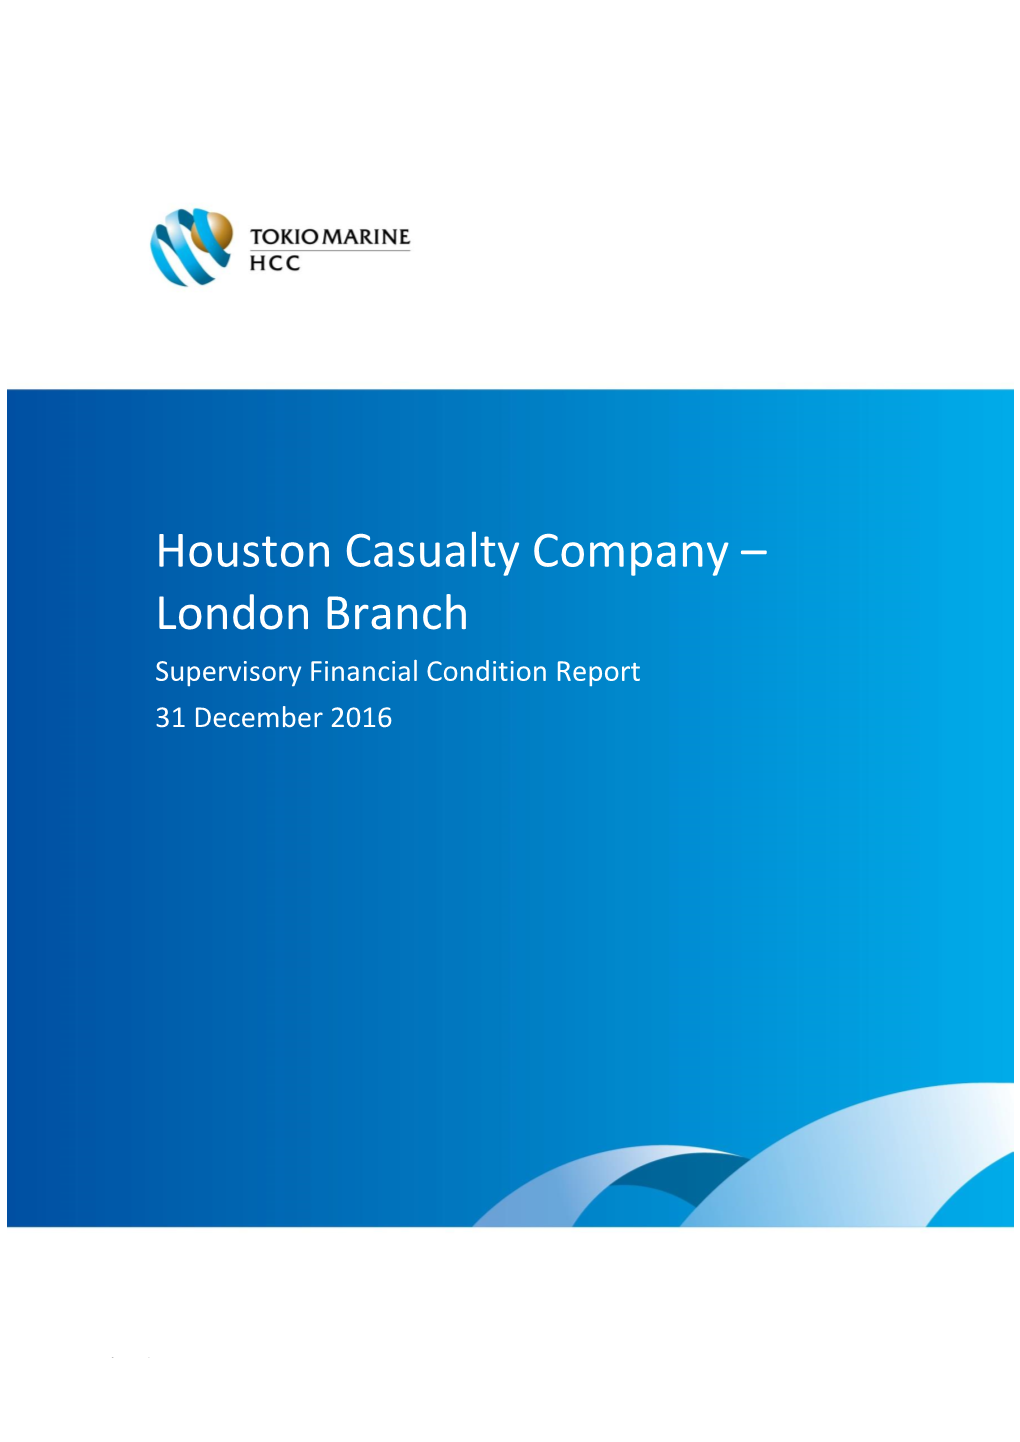 Houston Casualty Company – London Branch Supervisory Financial Condition Report 31 December 2016